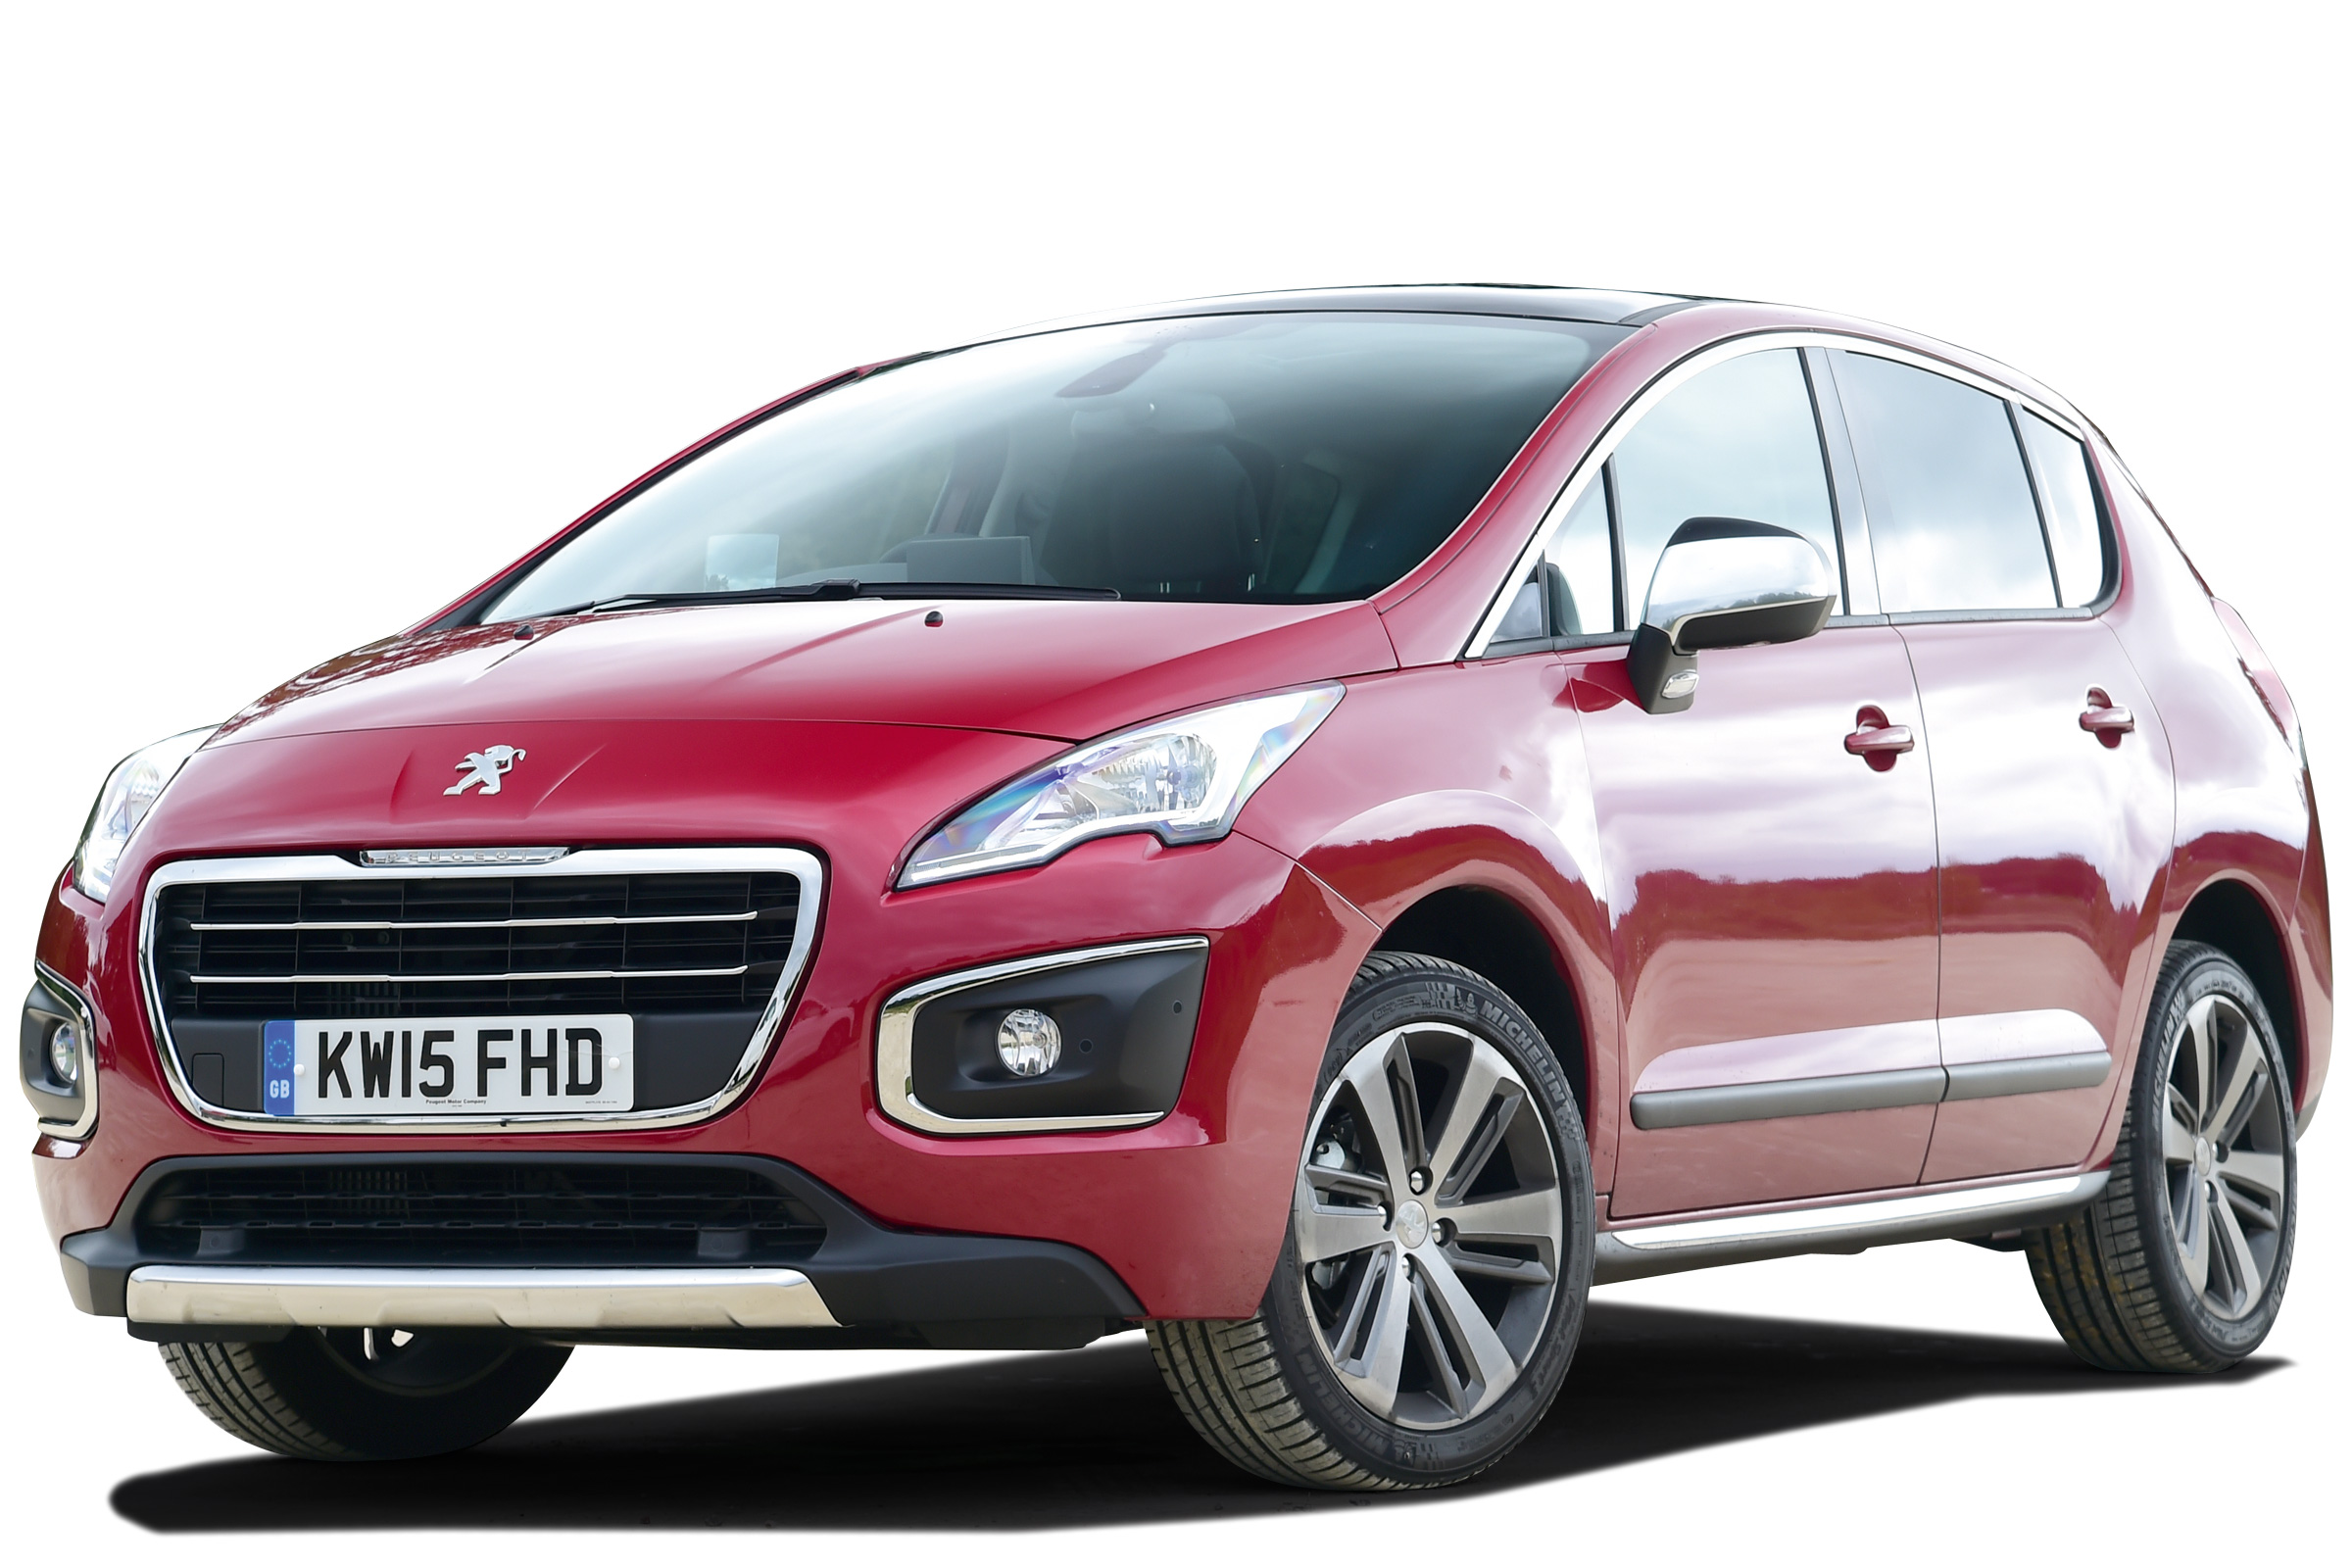 Peugeot 3008 Mpv Owner Reviews Mpg Problems Reliability Carbuyer